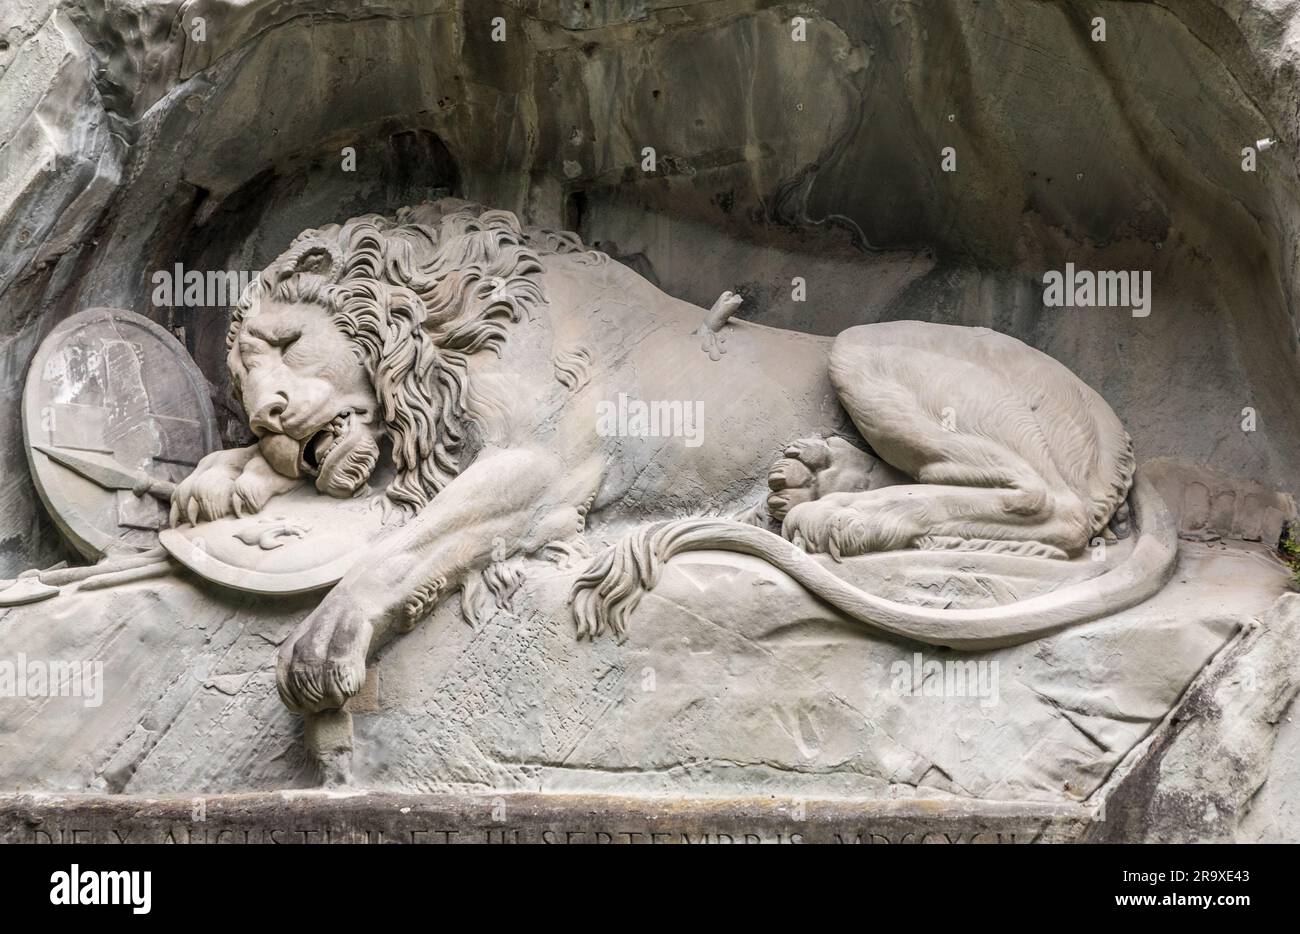 Nice close-up view of Lucerne's famous lion monument carved in stone. It is a landmark, a commemoration, a work of art and a memorial. It is dedicated... Stock Photo